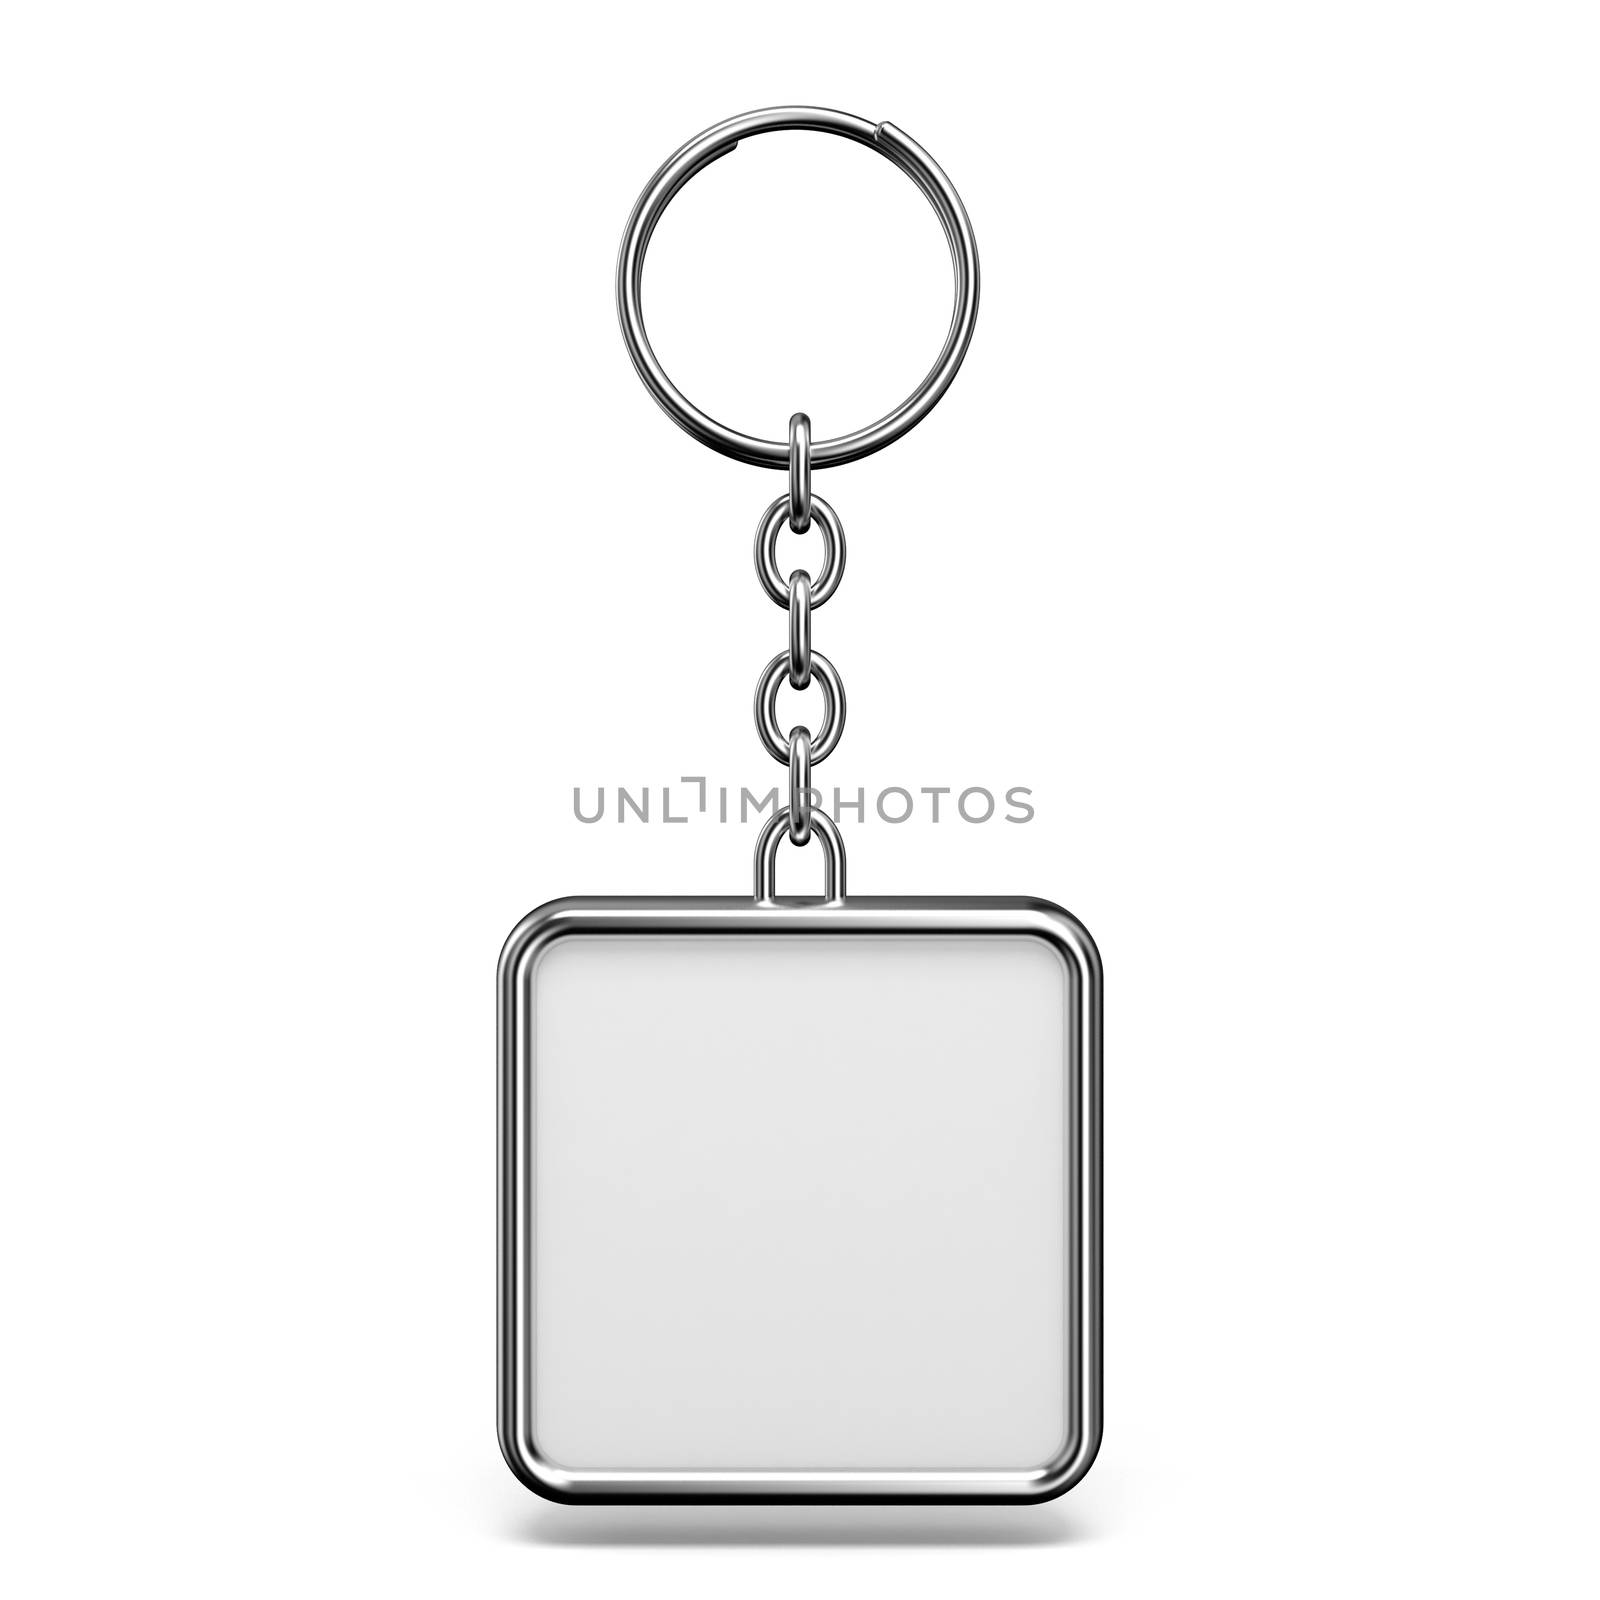 Blank metal trinket with a ring for a key square shape 3D  rendering illustration isolated on white background